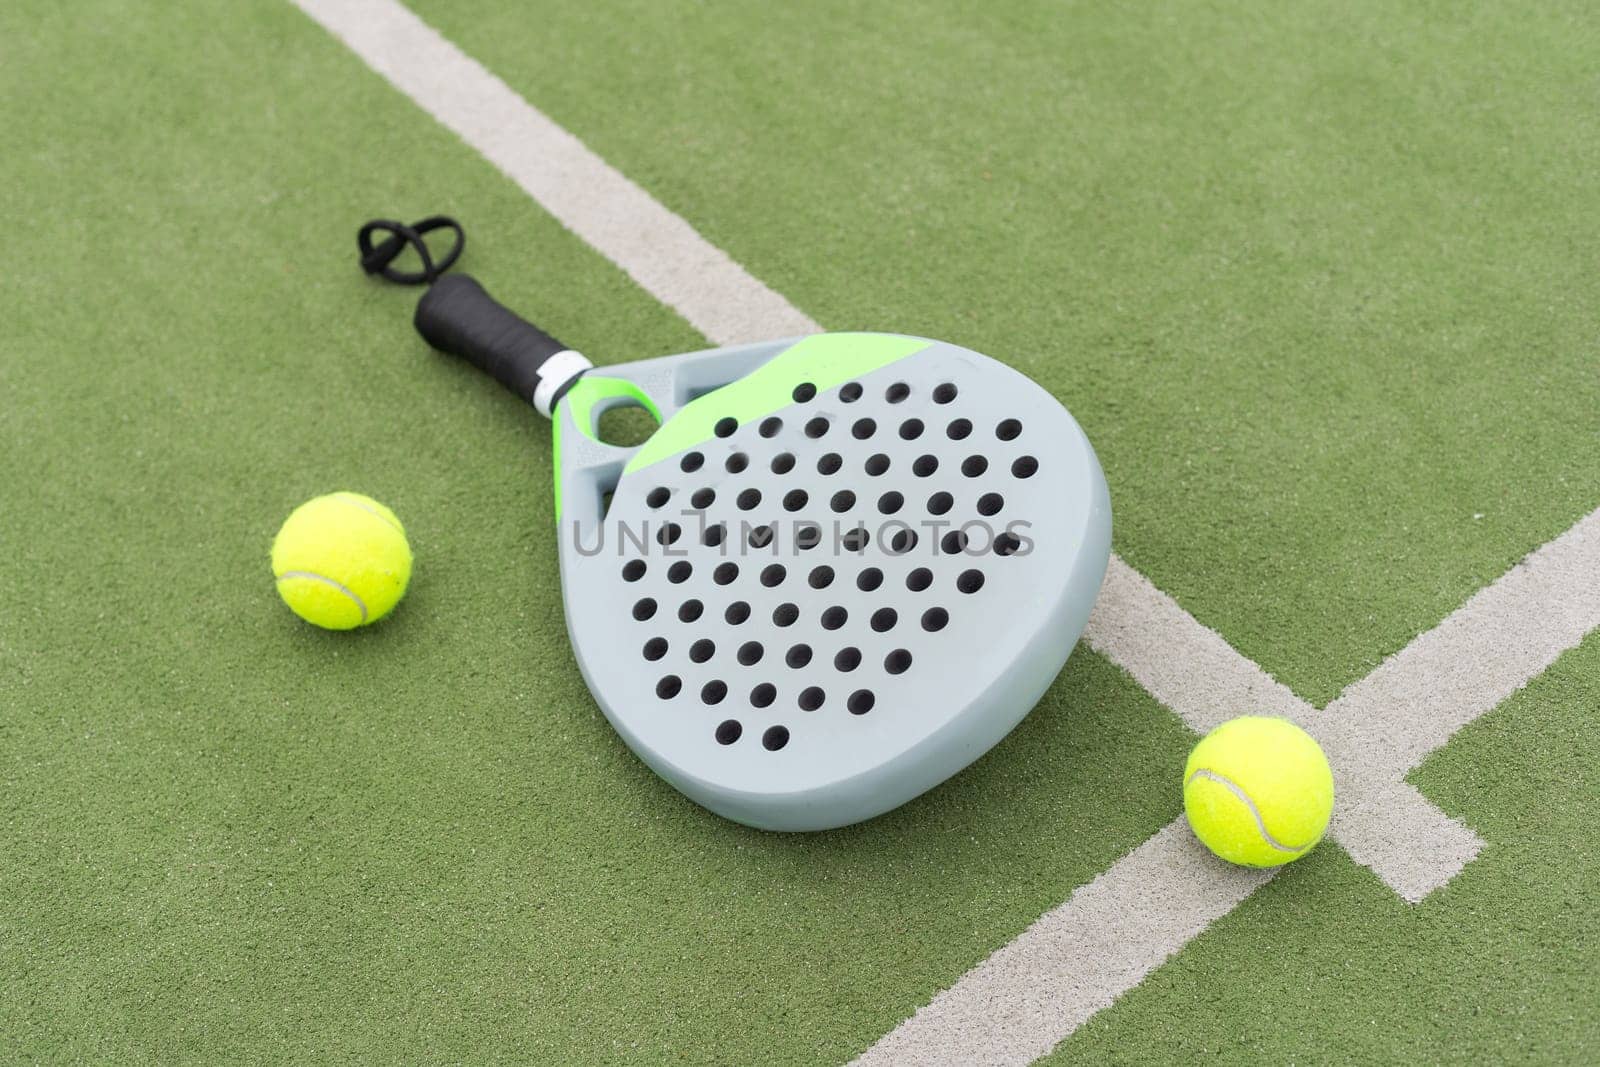 Paddle tennis objects on grass court. High quality photo